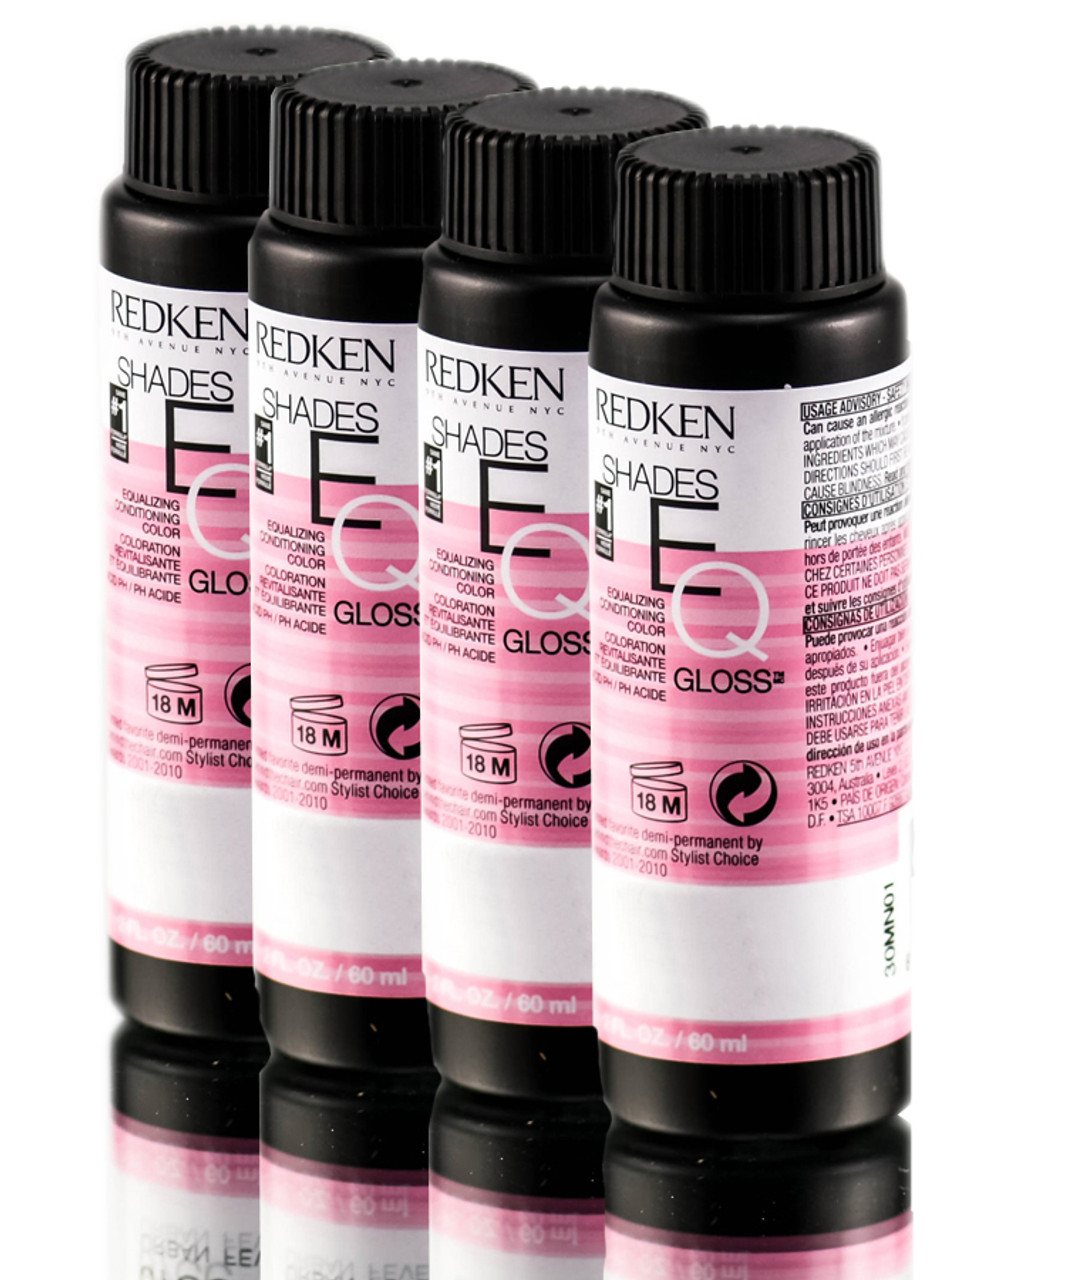 Redken Shades EQ Equalizing Conditioning Color Gloss